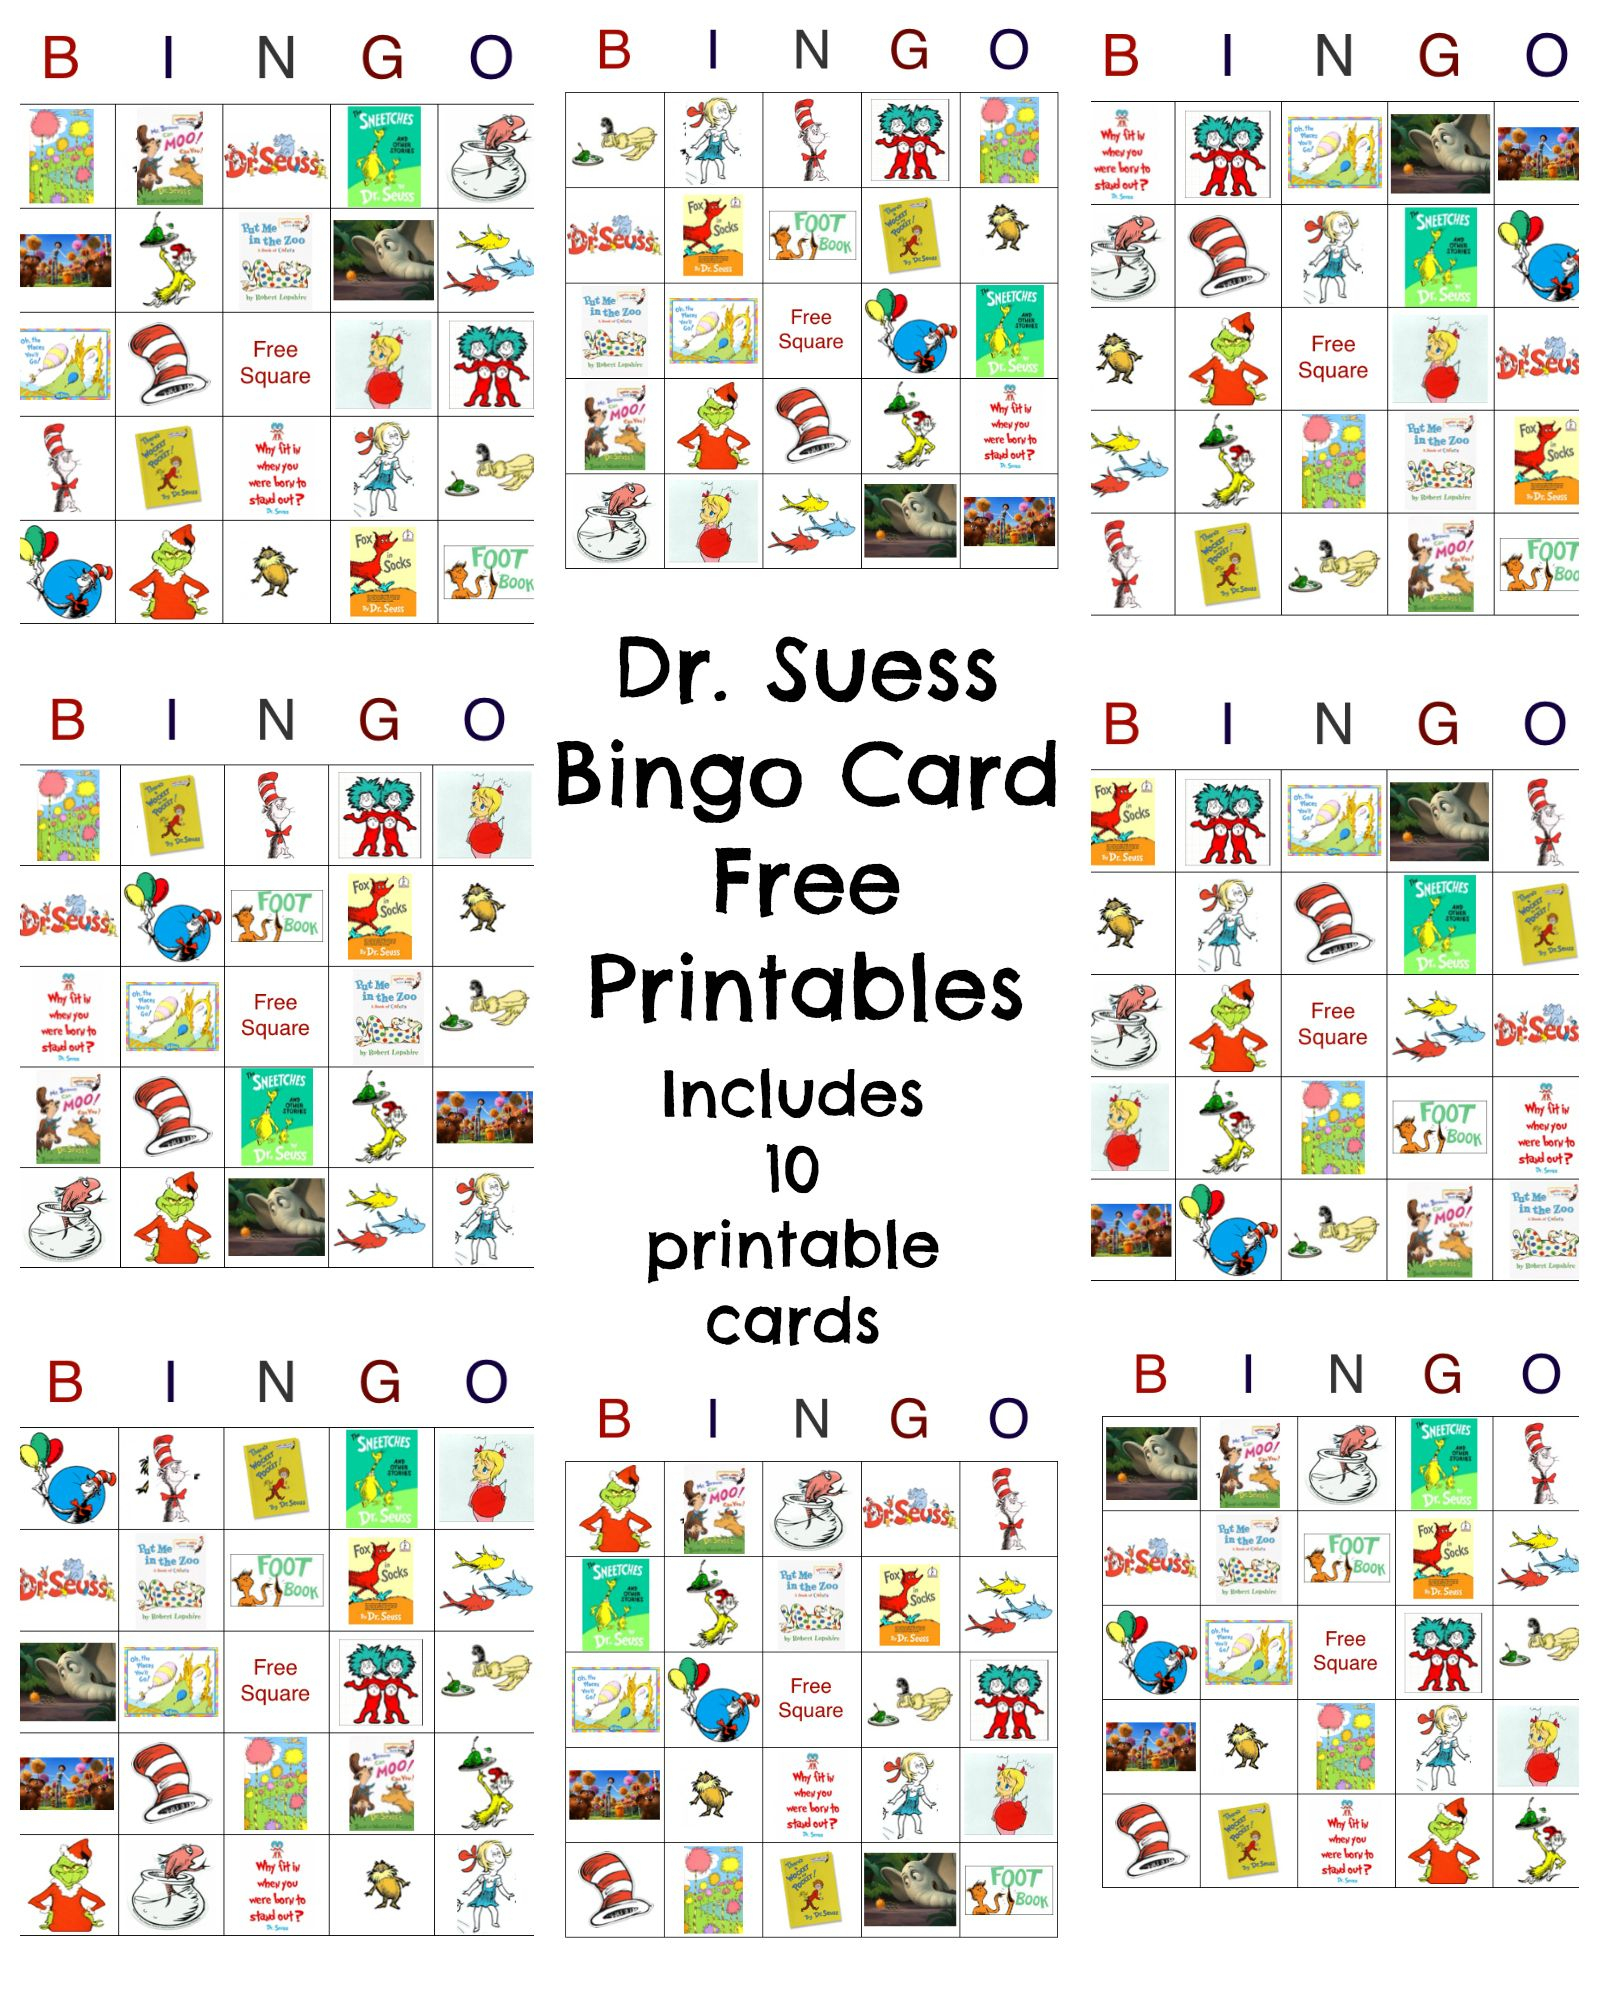 Dr Seuss Bingo Game Free Printable | Best Crafts And Diy | Pinterest - Free Printable Dr Who Birthday Card